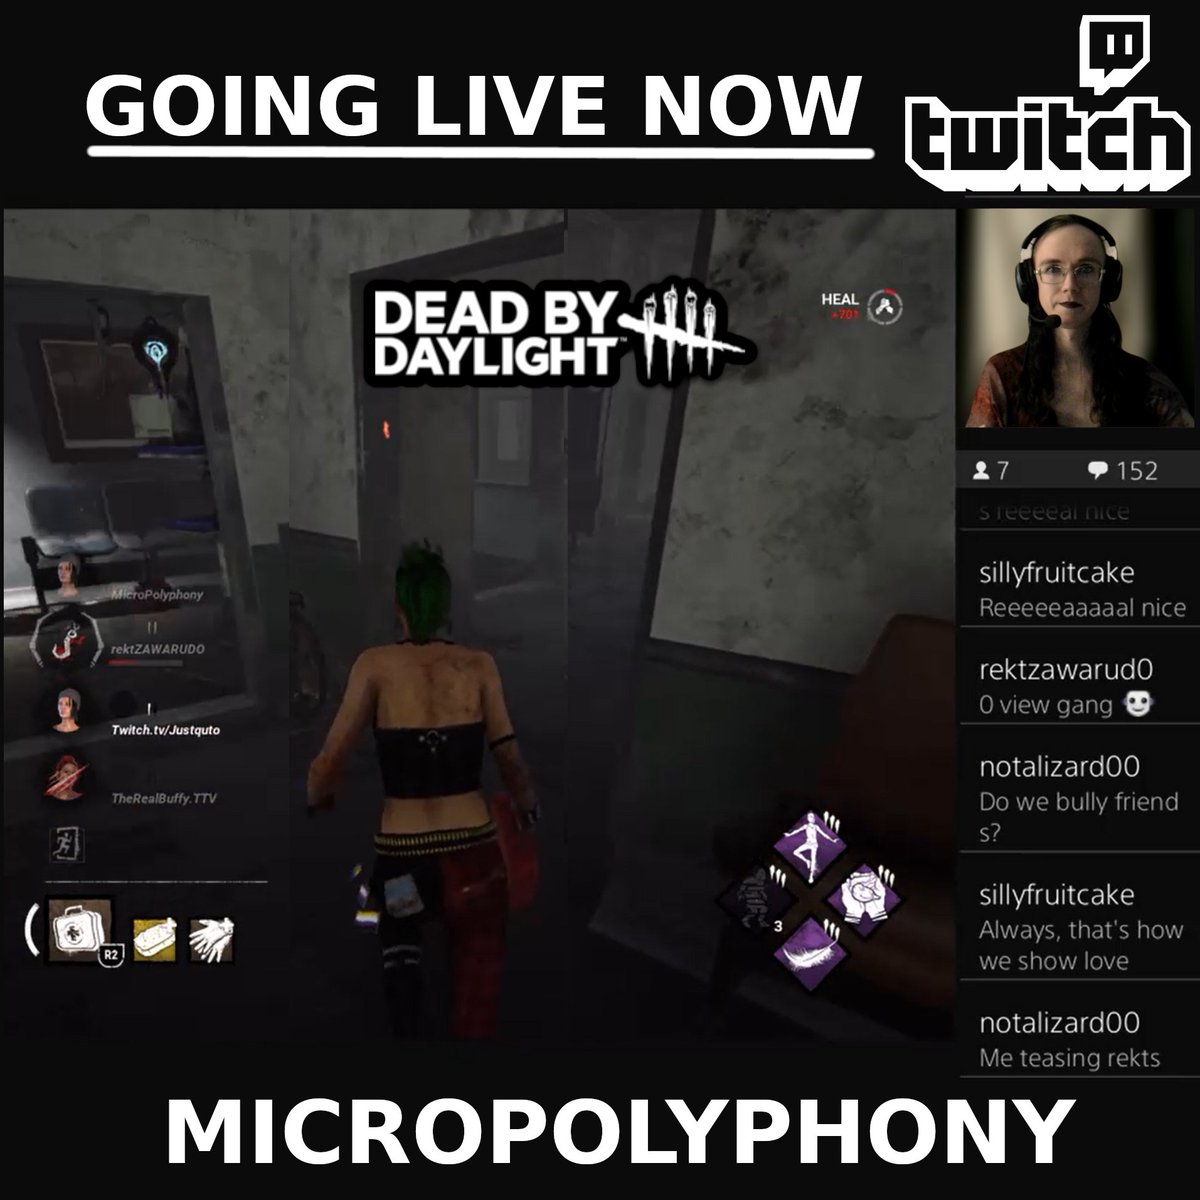 Going live now on Twitch! 'Hejja hejja' as they say!
Dead by Daylight❤️ Survivor & Killer

#Twitch #DeadbyDaylight #SmallStreamer #PS4 #PS4Live #Gaming #DbD #Horror #Survivor #Stream #TwitchAffiliate #TwitchTV #PlayStation #LGBTQ #Sweden

Link: twitch.tv/micropolyphony